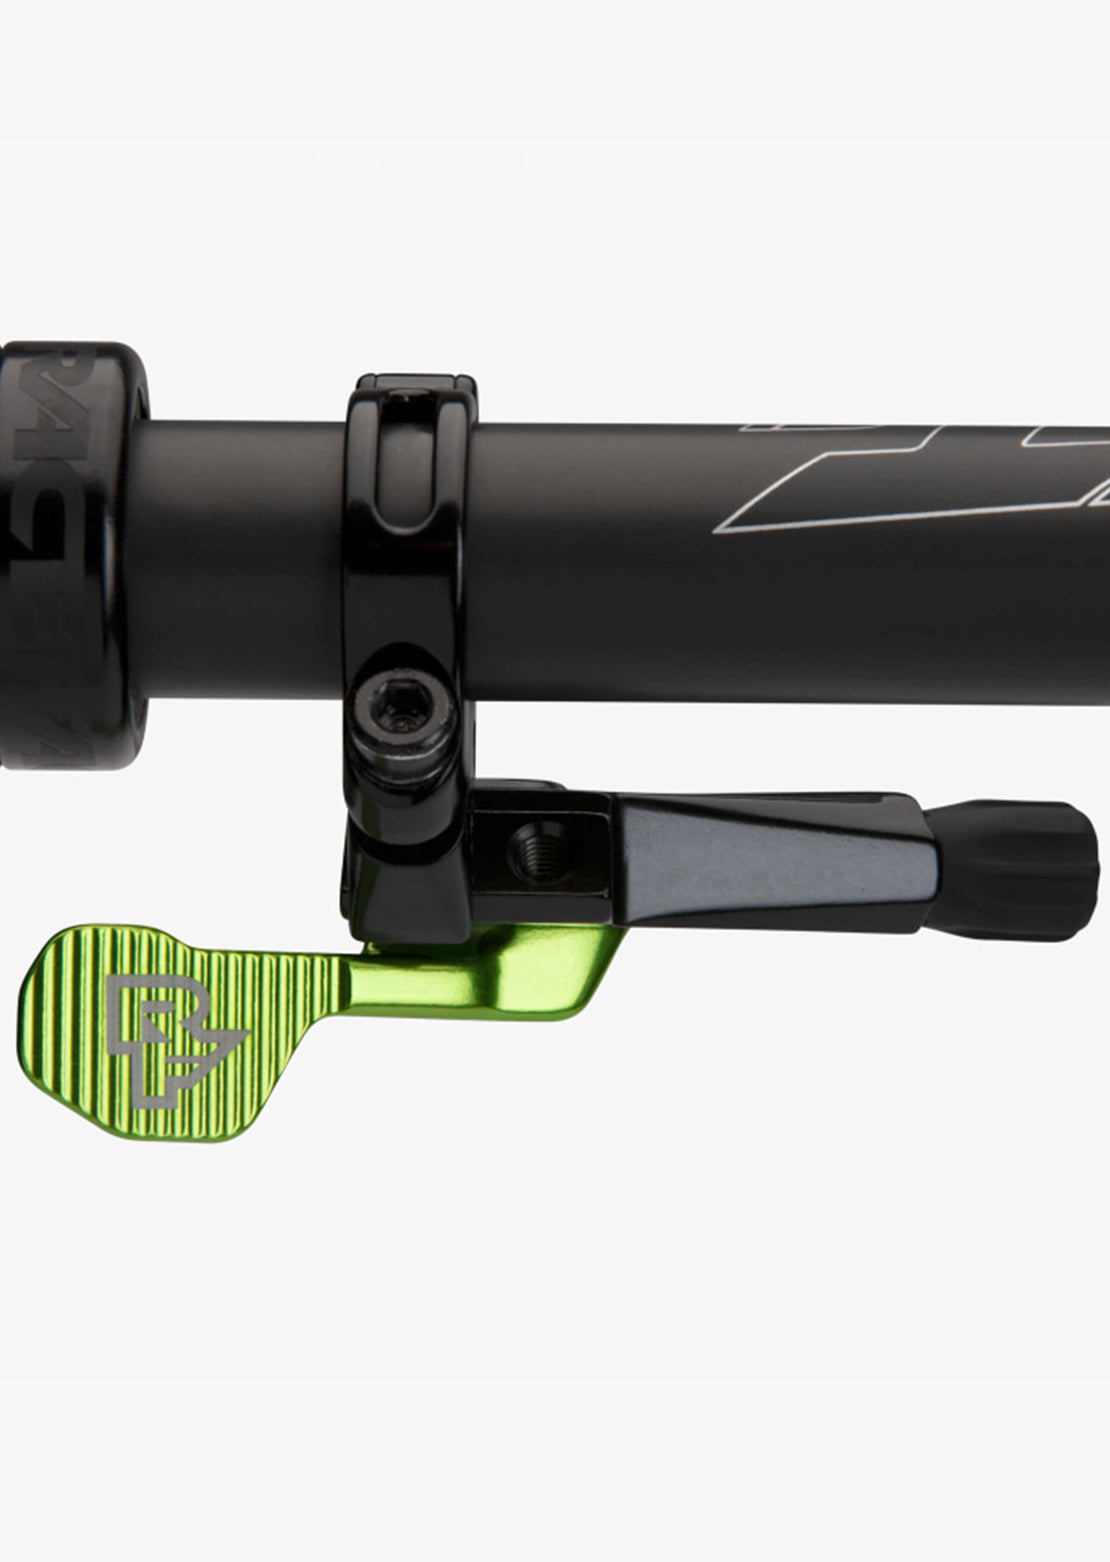 Race Face Turbine R 1x Seatpost Lever Green Installed